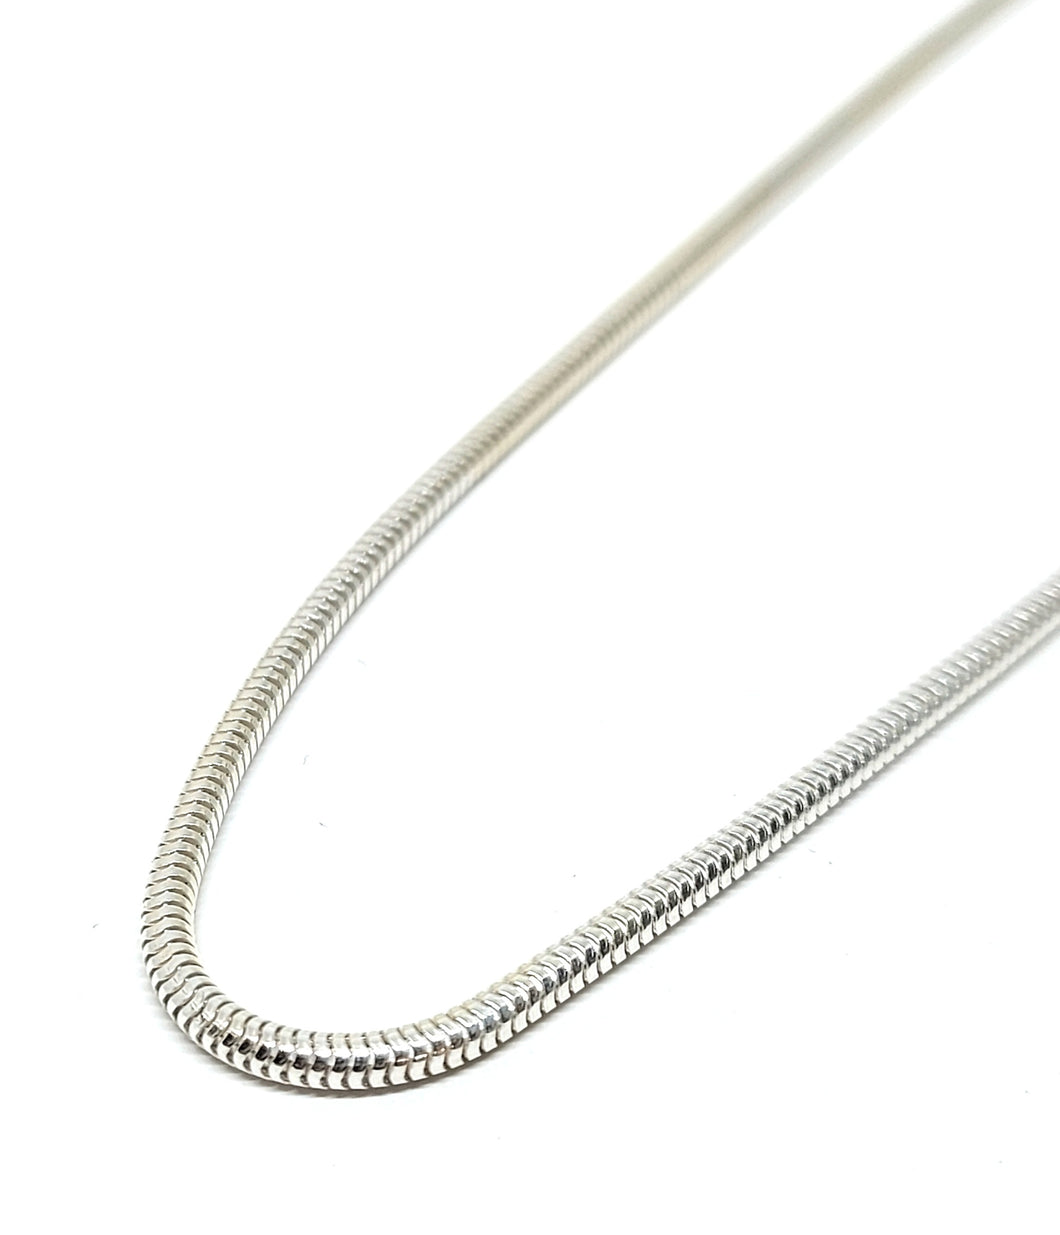 Snake chain 2.4 mm in sterling silver (925)